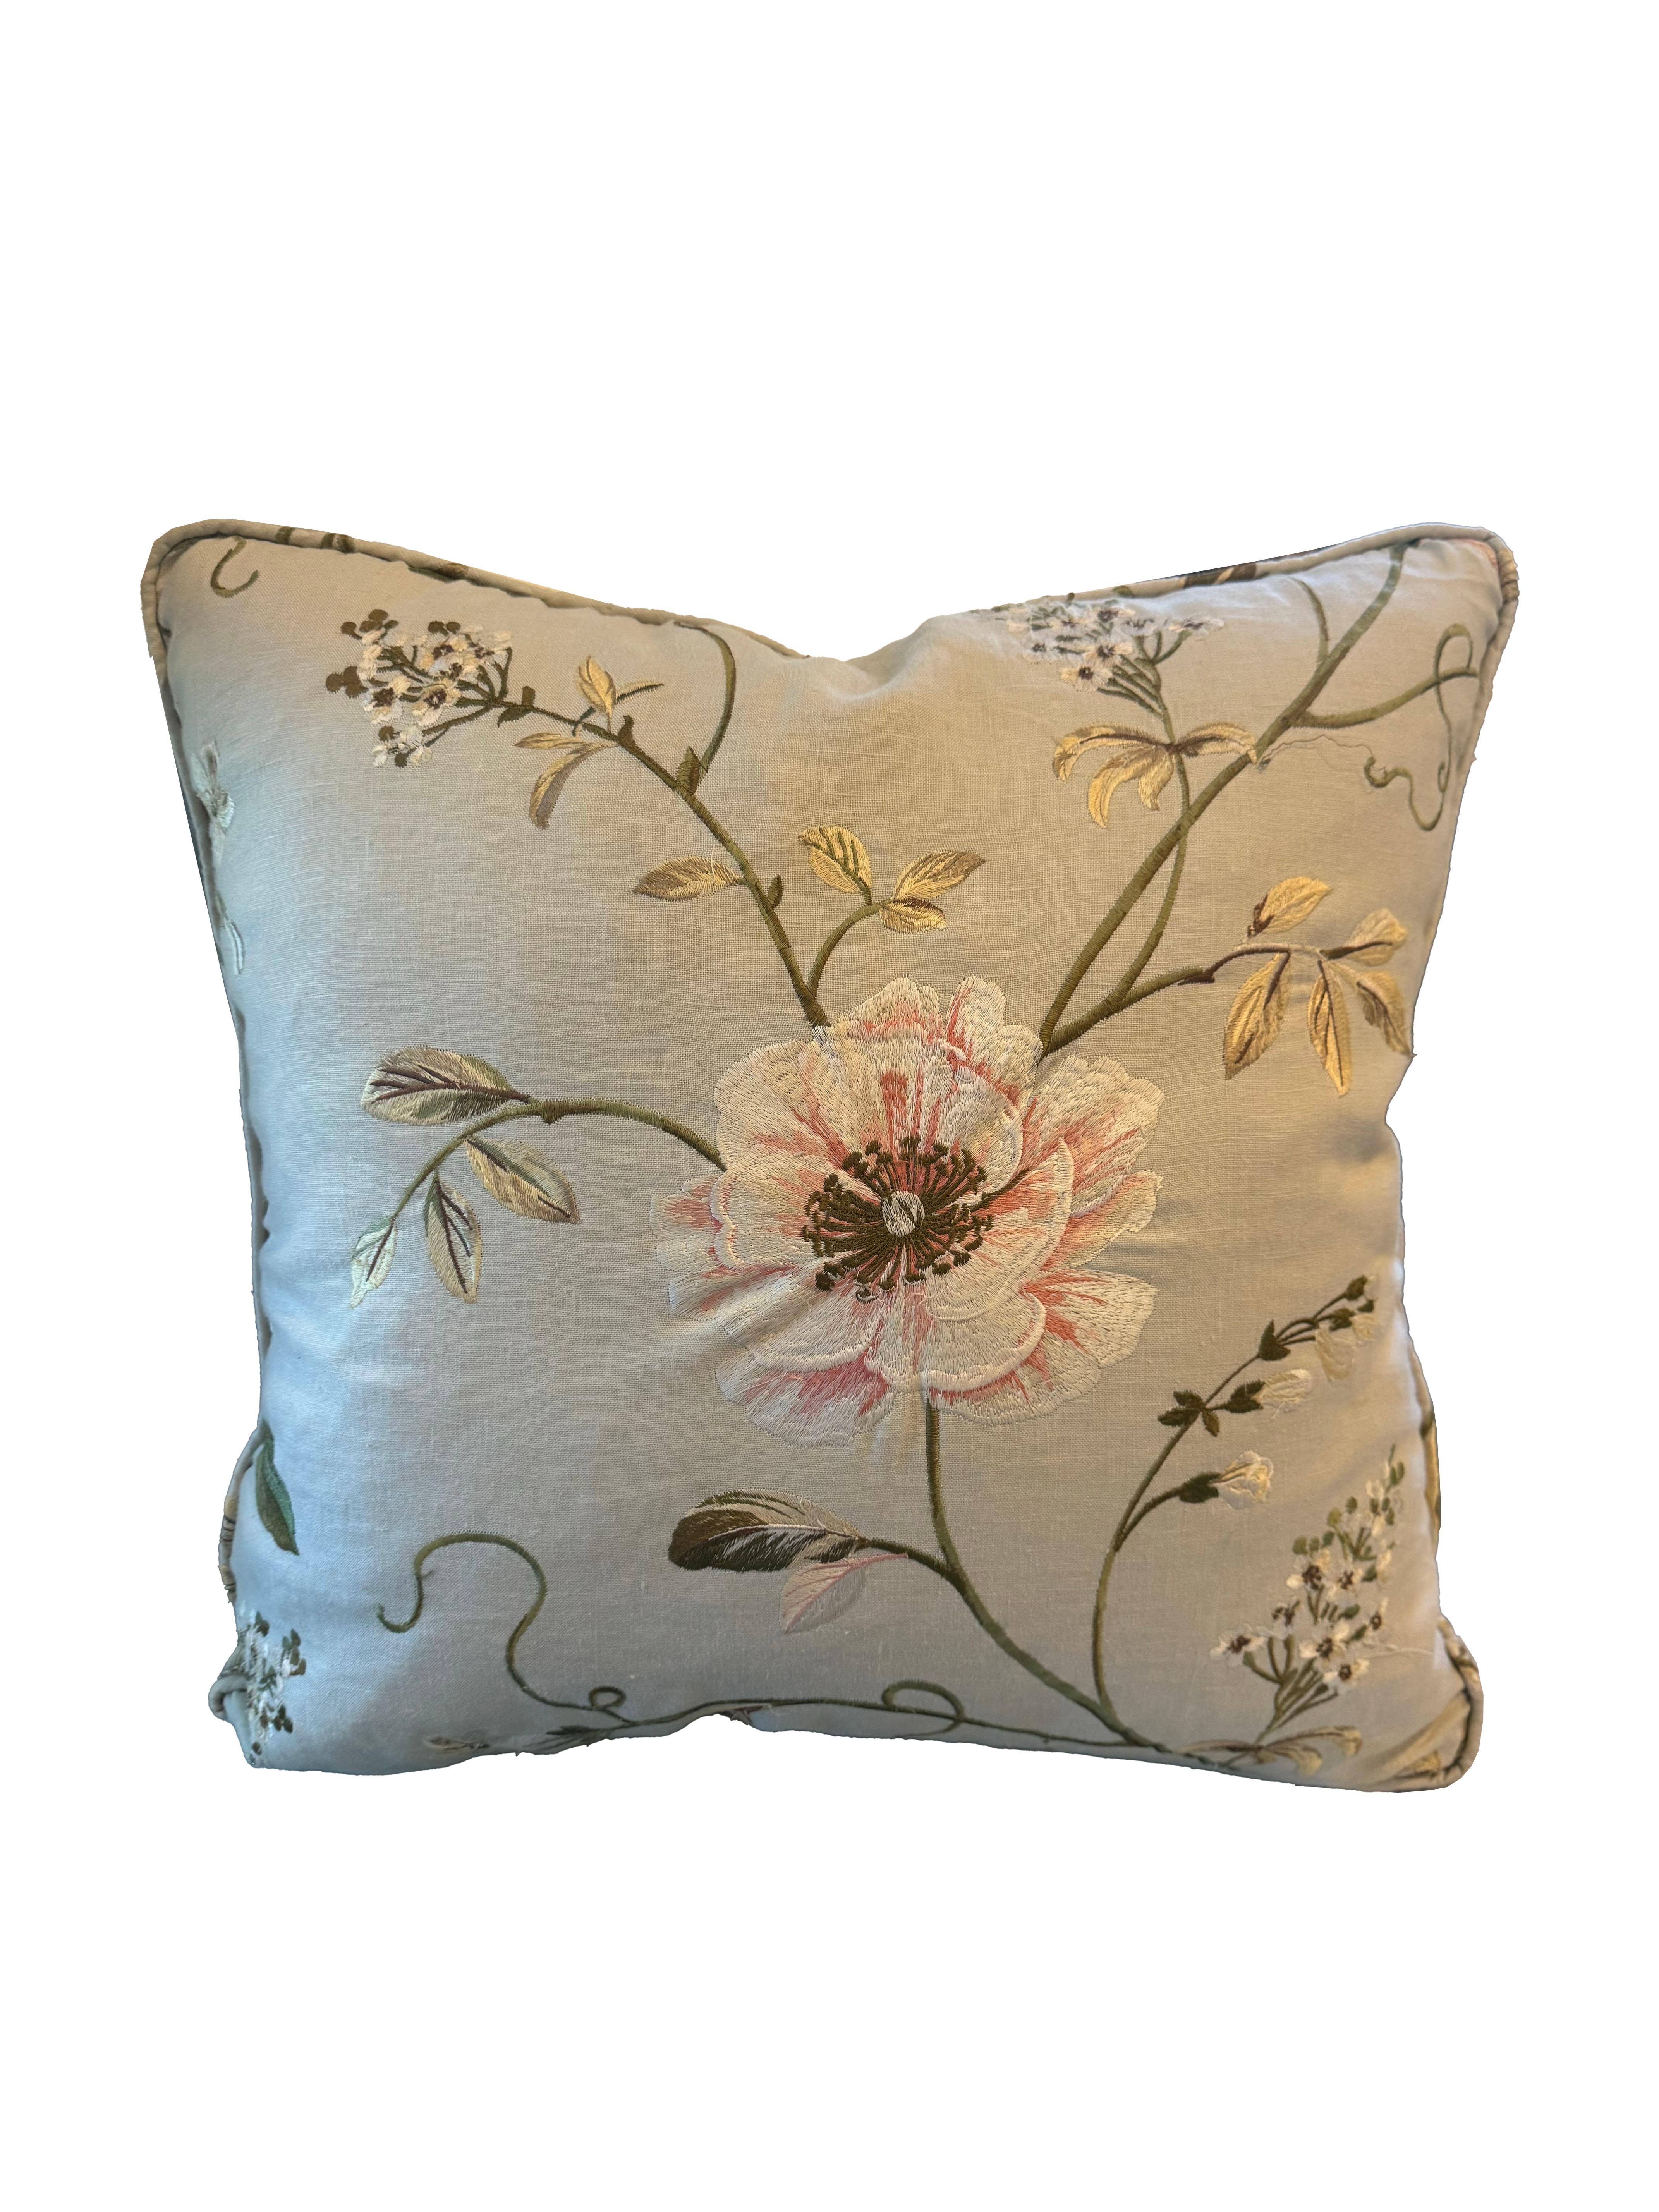 Enhance your living space with this exquisite pair of crewelwork pillows. The beautiful embroidery, featuring a captivating floral motif, is showcased on a soft, pale bluish-gray linen background, creating a harmonious blend of elegance and